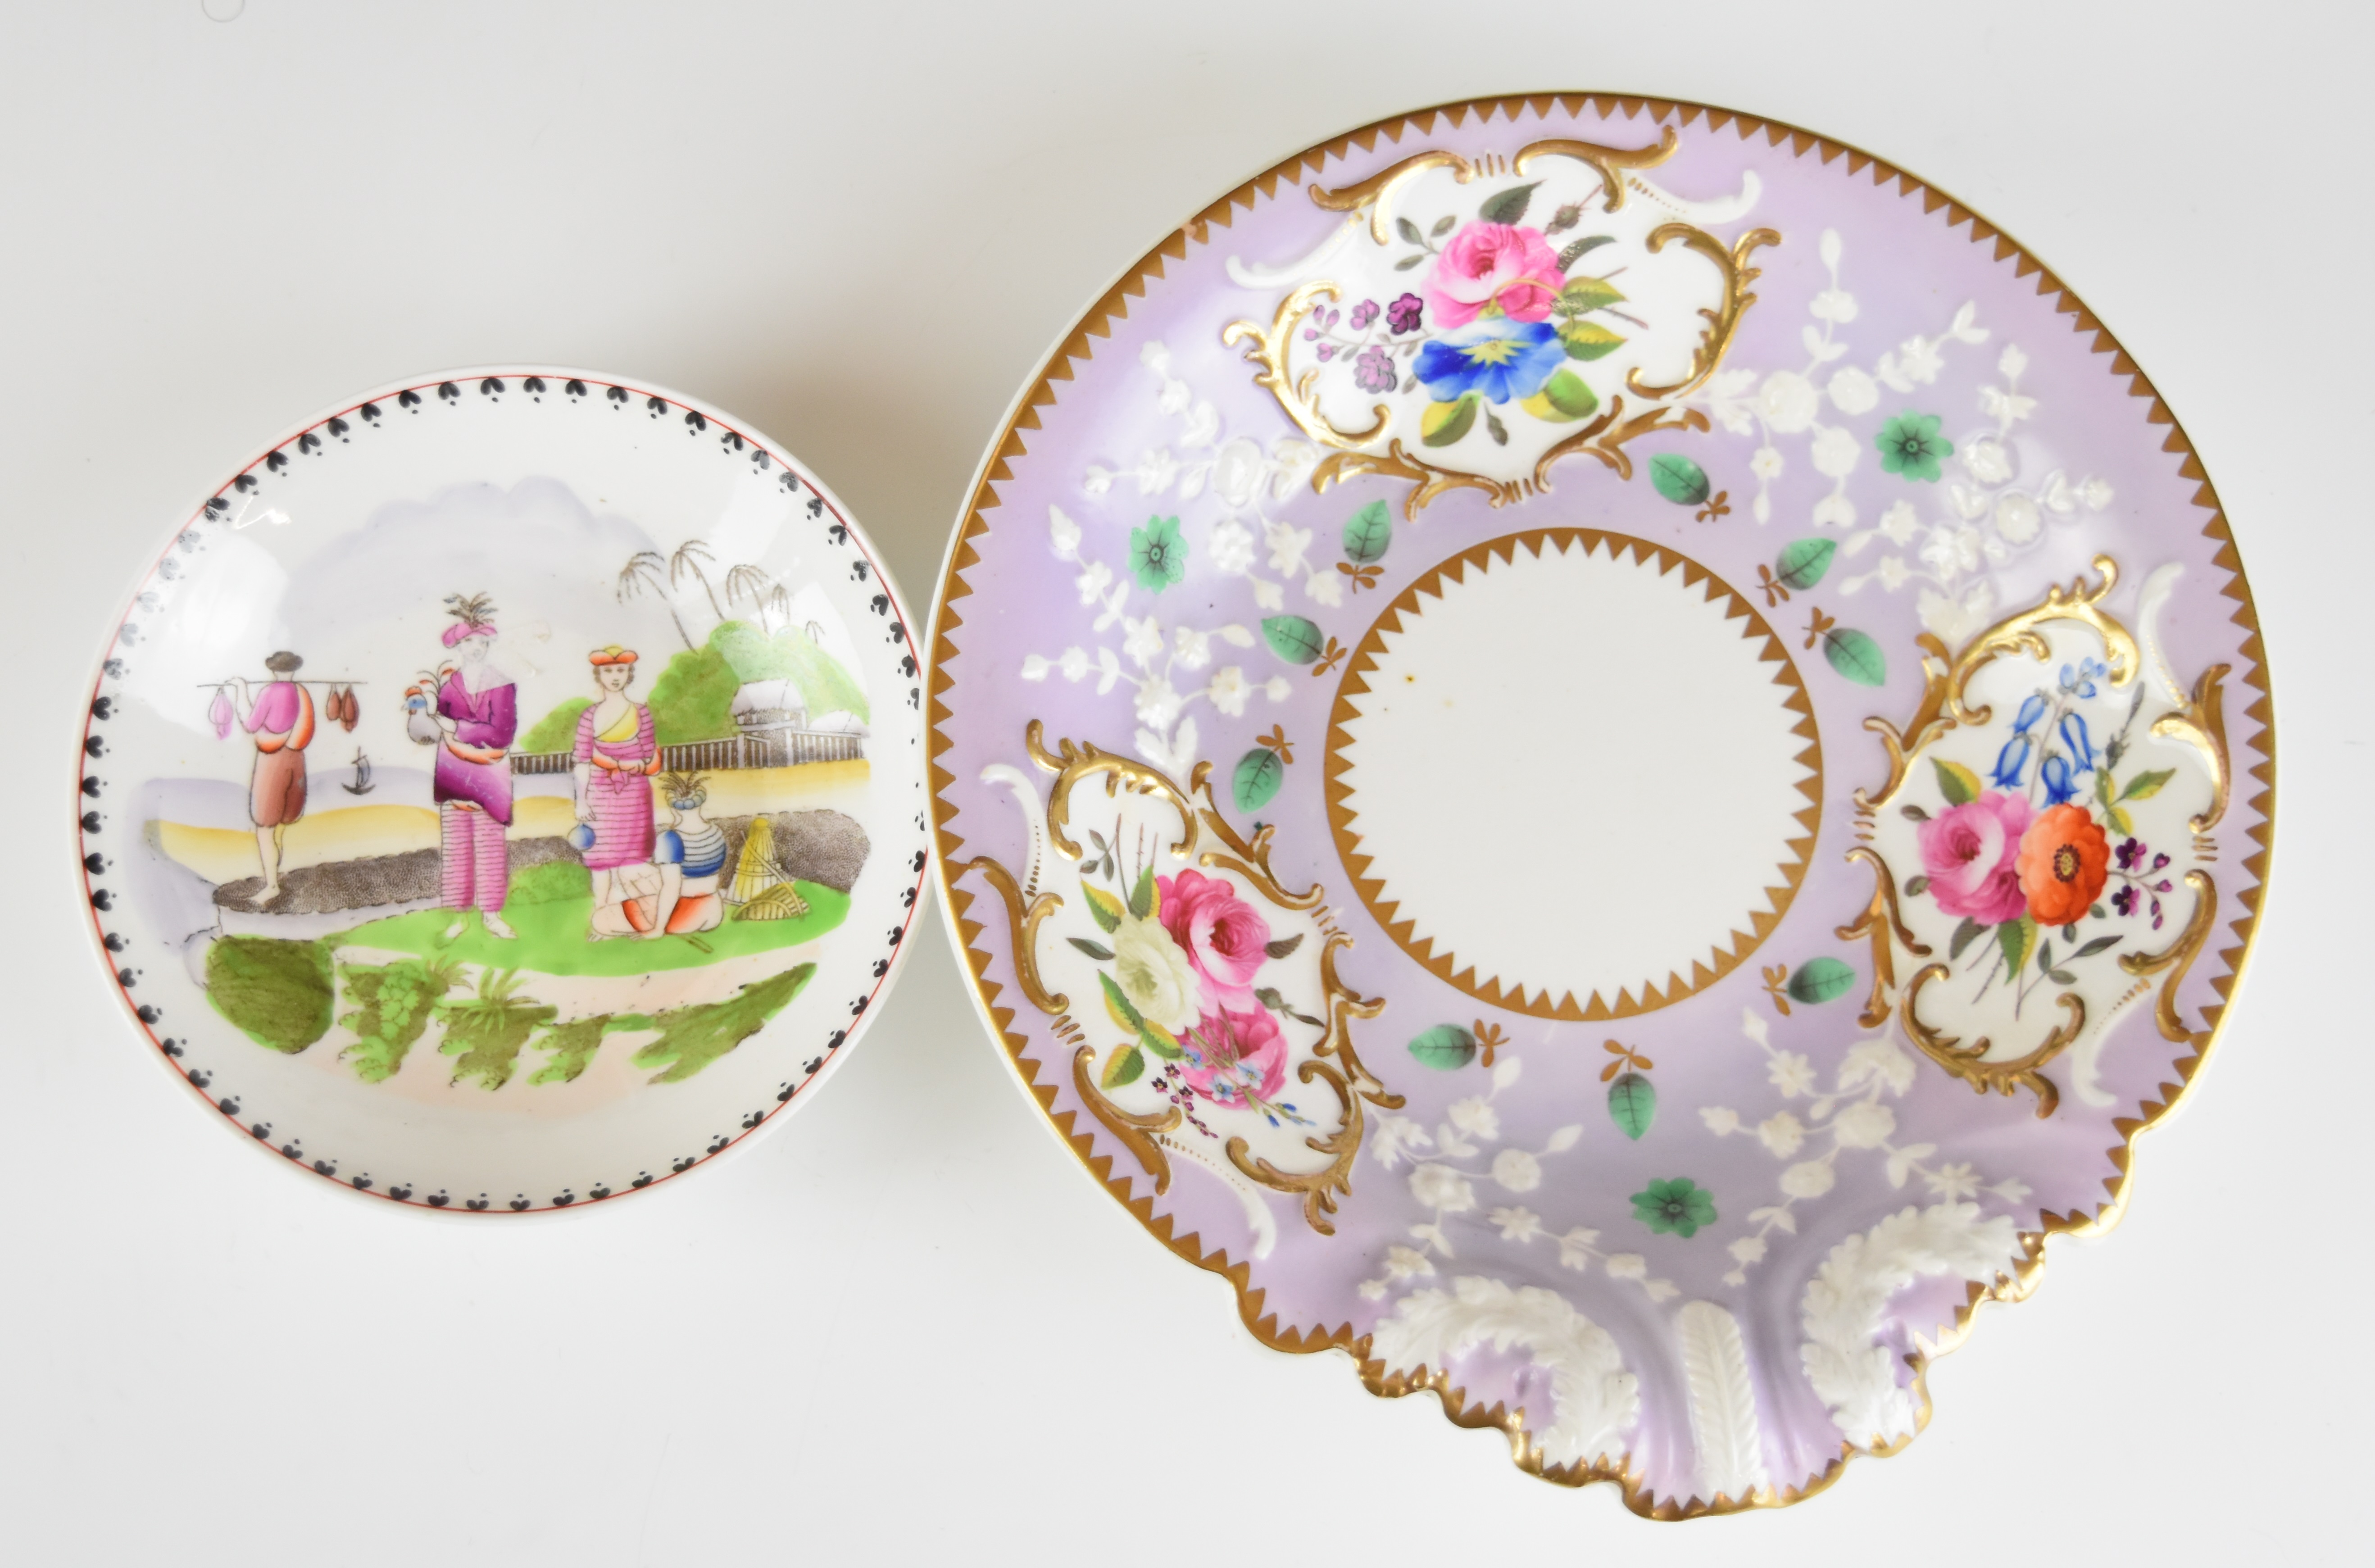 19thC porcelain saucers, dishes, coffee cans and cups including New Hall, Ridgway, bat print - Image 7 of 22